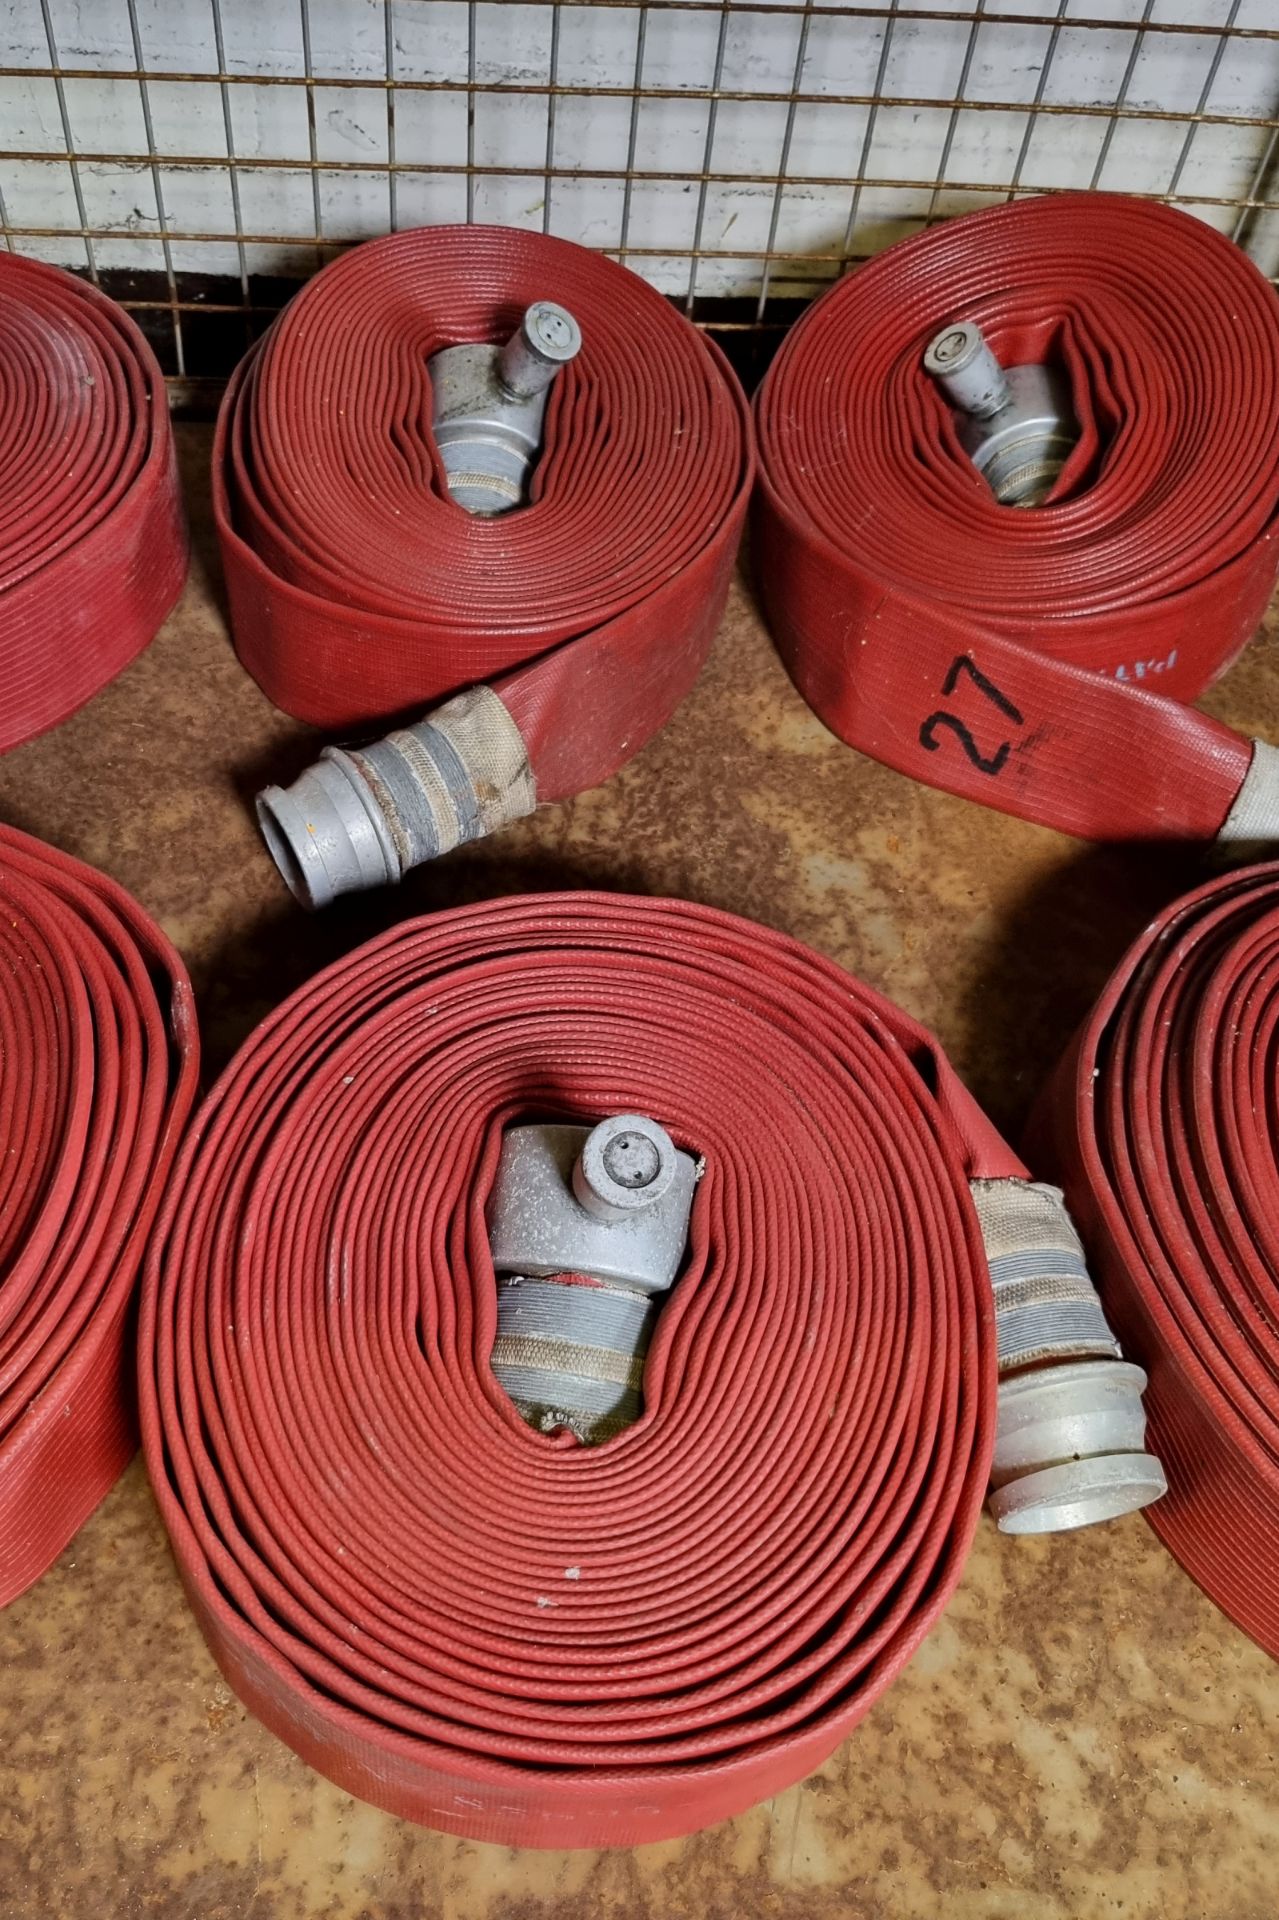 6x Angus Duraline 64mm lay flat hoses with couplings - approx 15m in length - Image 4 of 5